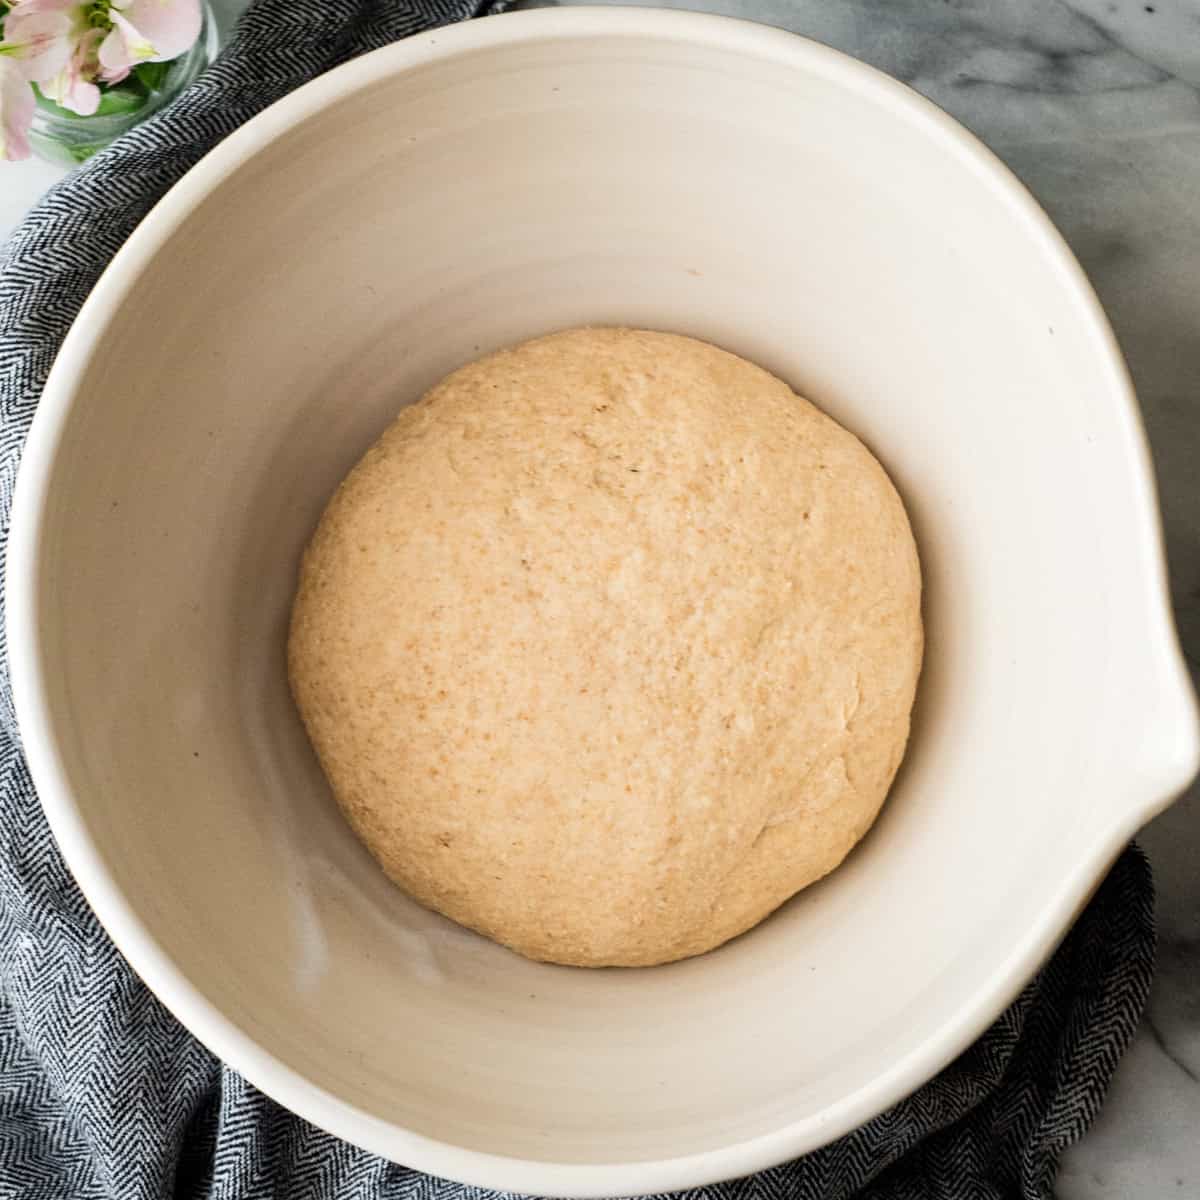 How to Make Honey Wheat Bread  - dough in a bowl before rising